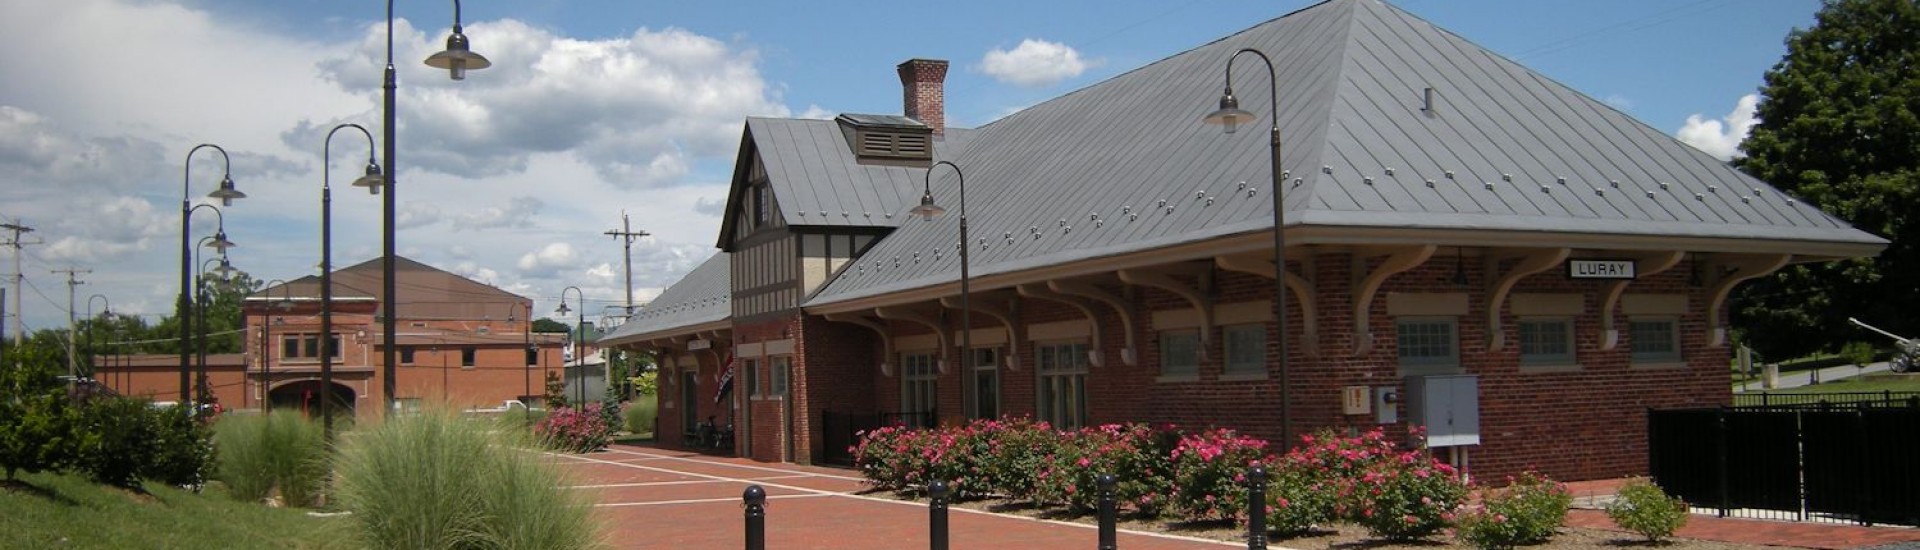 Luray Train Station today, Luray Visitor Center, Page County Chamber of Commerce.